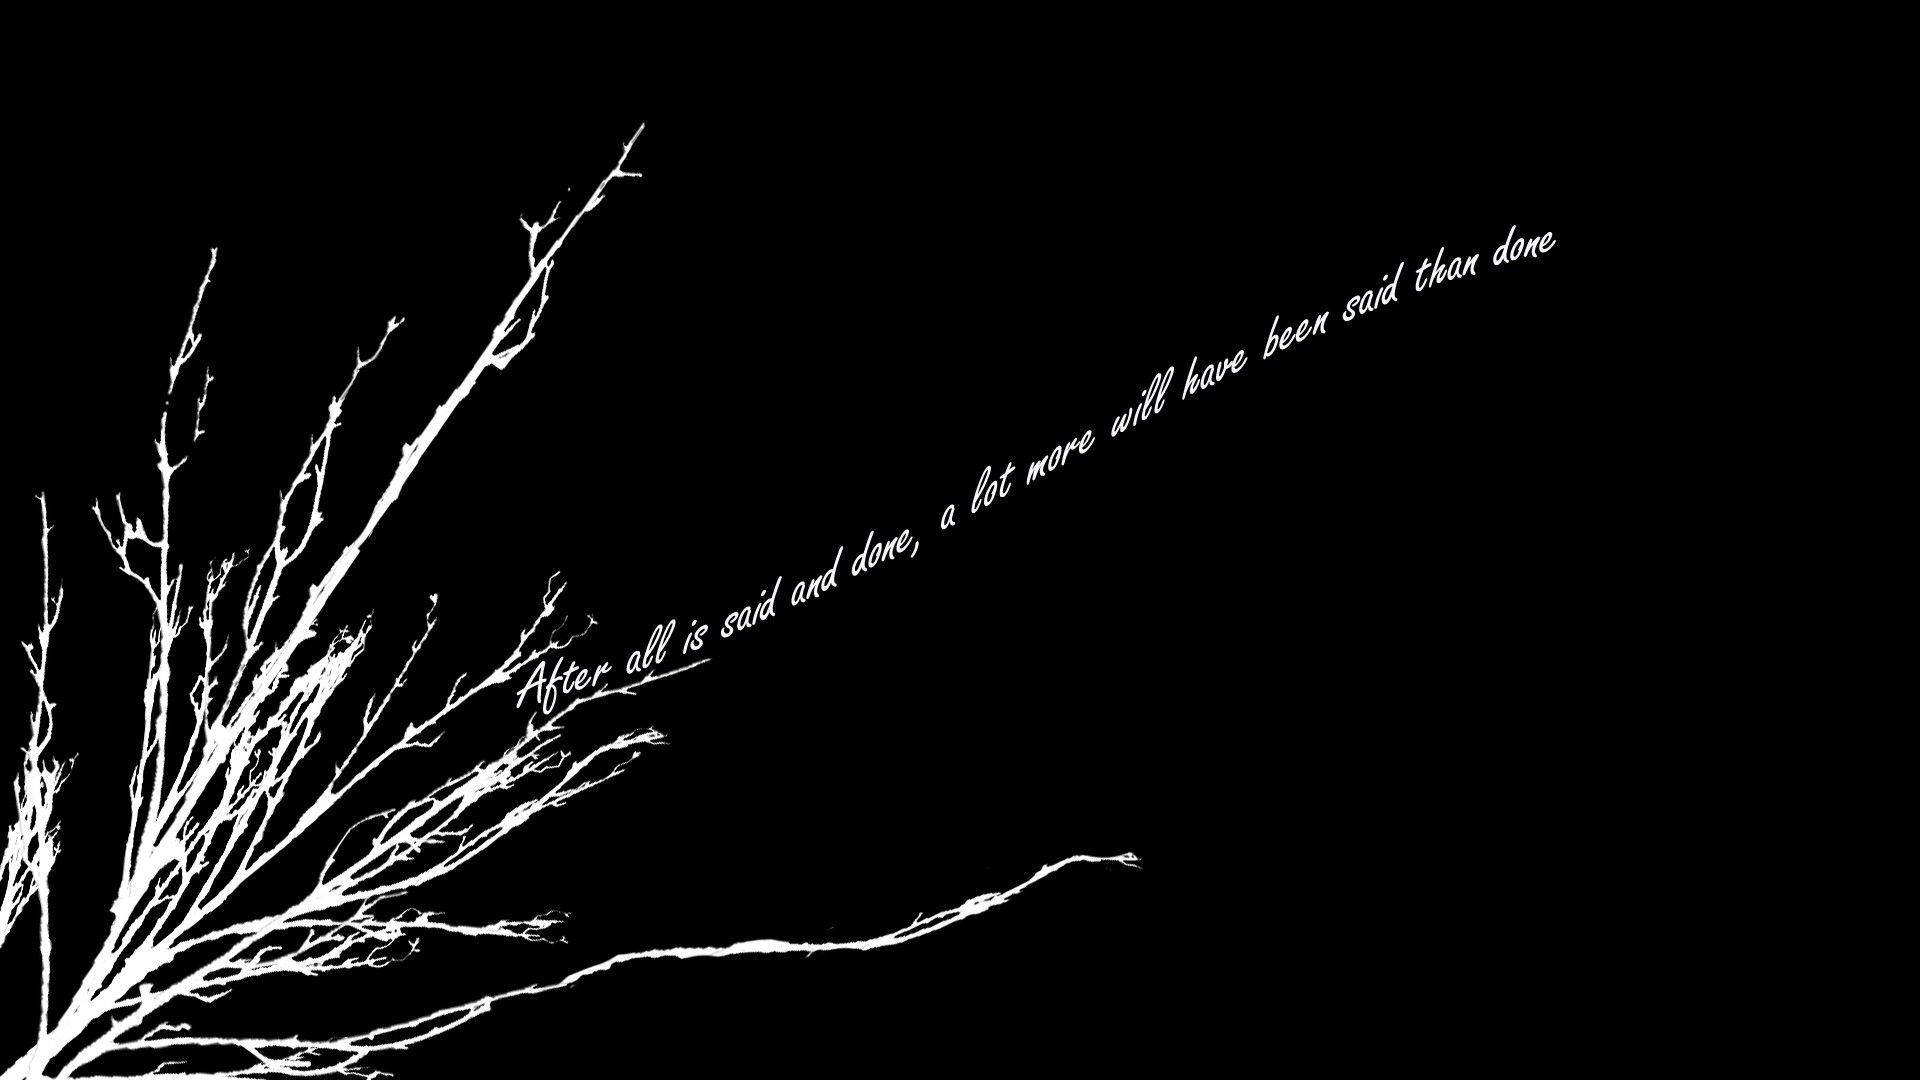 Download Black Deep Quotes Aesthetic Tumblr And Laptop Wallpaper |  